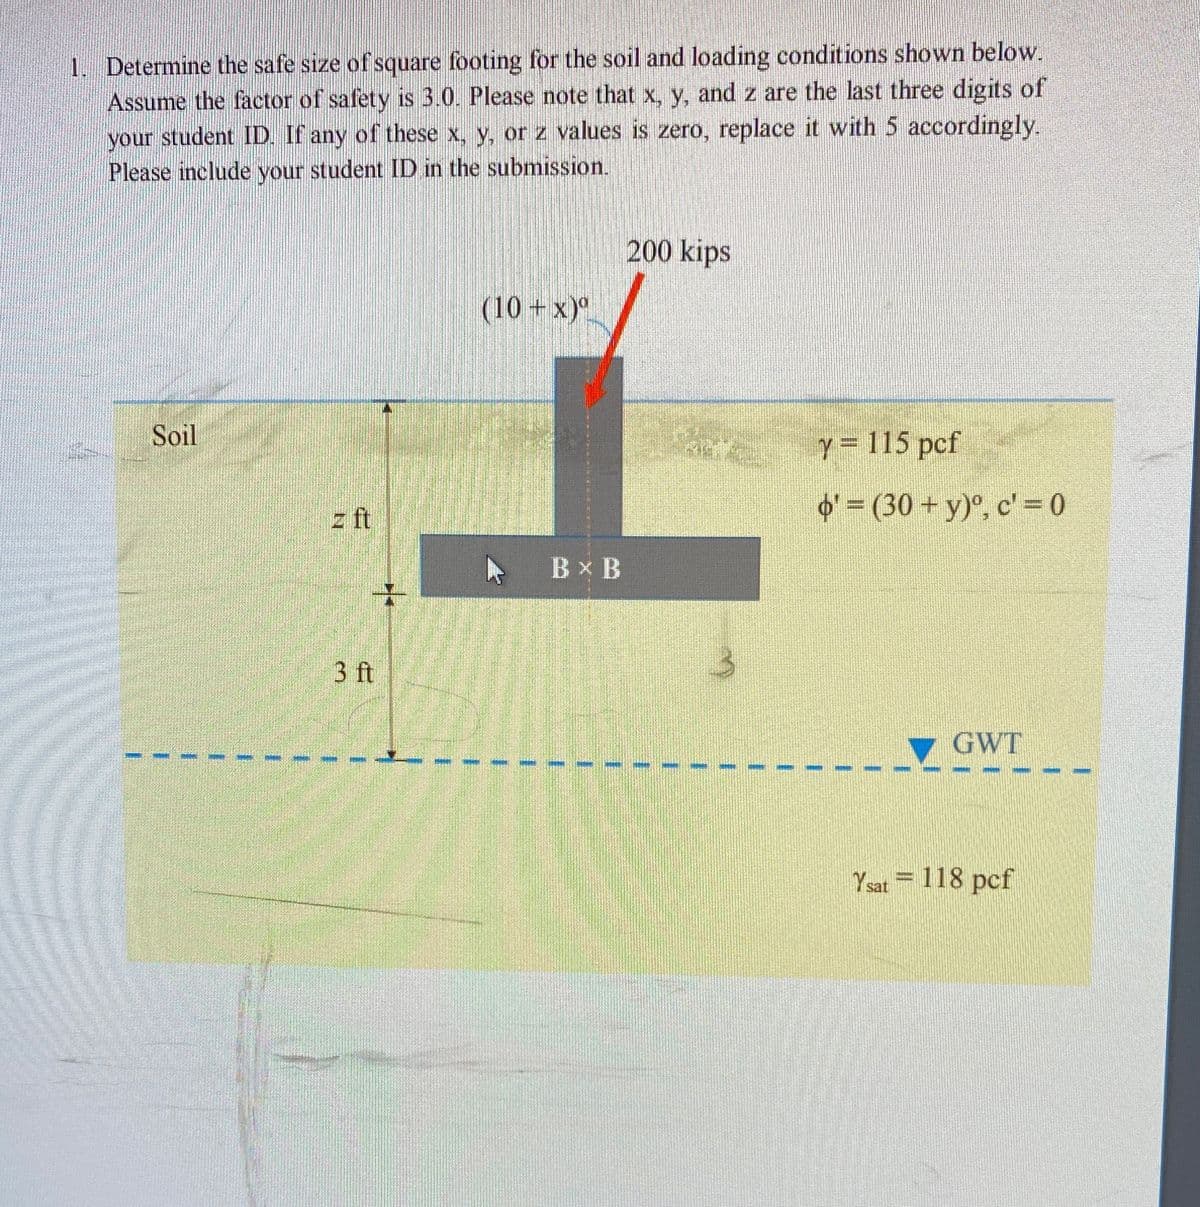 1. Determine the safe size of square footing for the soil and loading conditions shown below.
Assume the factor of safety is 3.0. Please note that x, y, and z are the last three digits of
your student ID. If any of these x, y, or z values is zero, replace it with 5 accordingly.
Please include your student ID in the submission.
your
200 kips
(10 +x)".
Soil
Y= 115 pcf
z ft
O' = (30 + y)°, c' = 0
トBXB
3 ft
GWT
Y sat = 118 pcf
